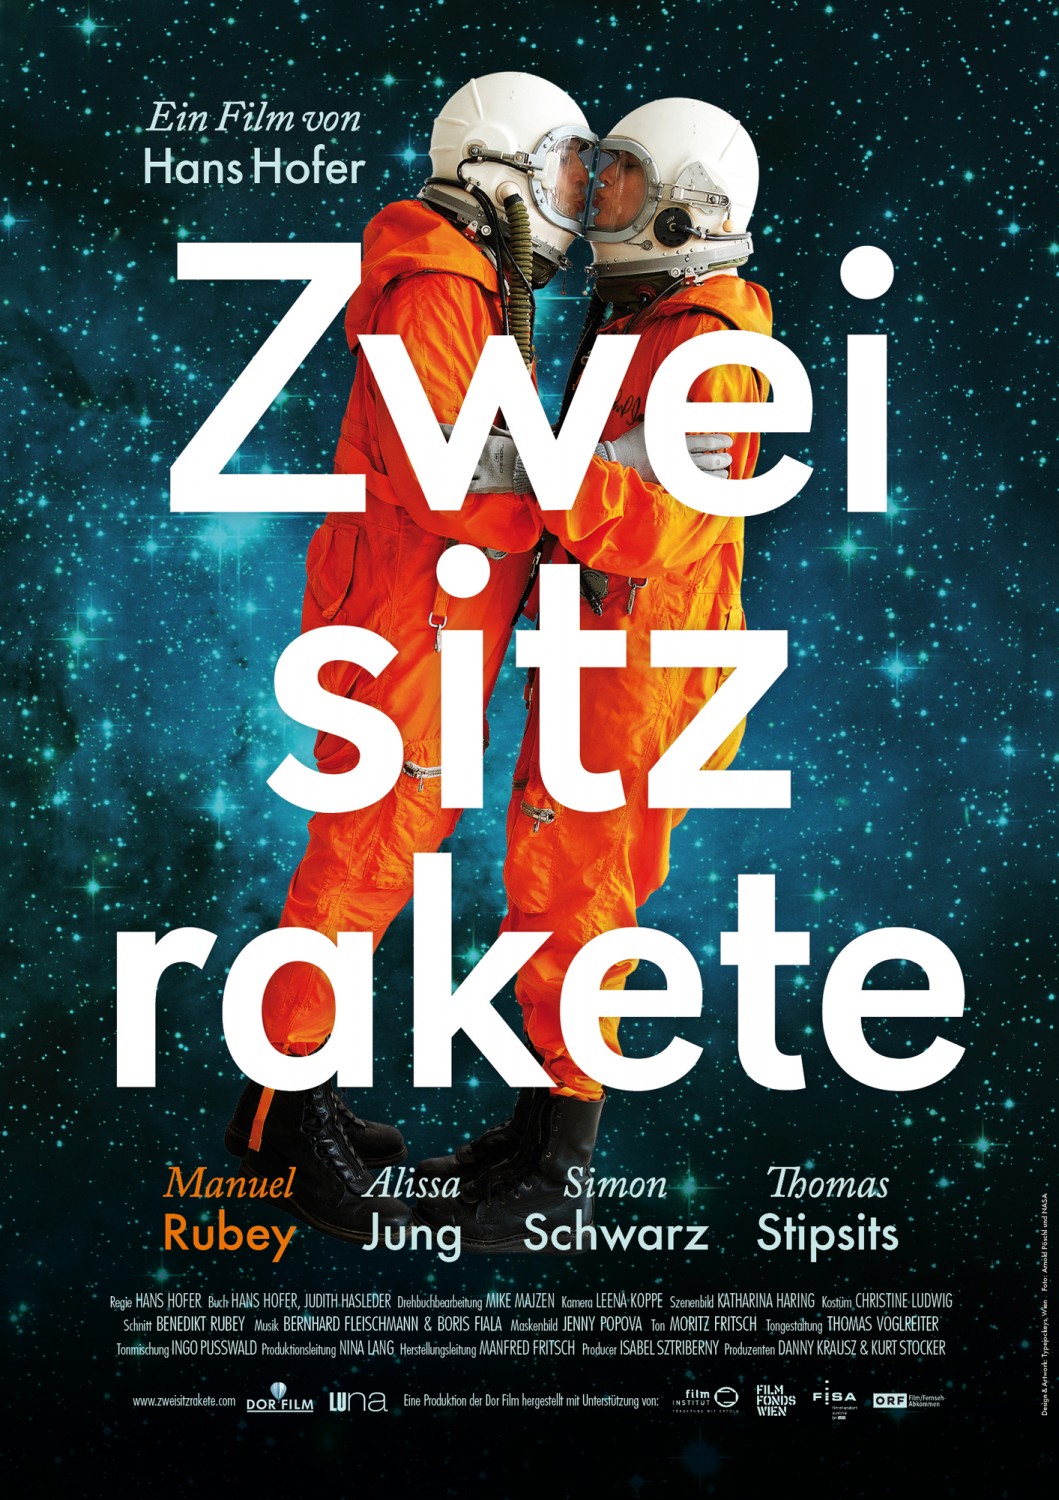 Extra Large Movie Poster Image for Zweisitzrakete (#2 of 2)